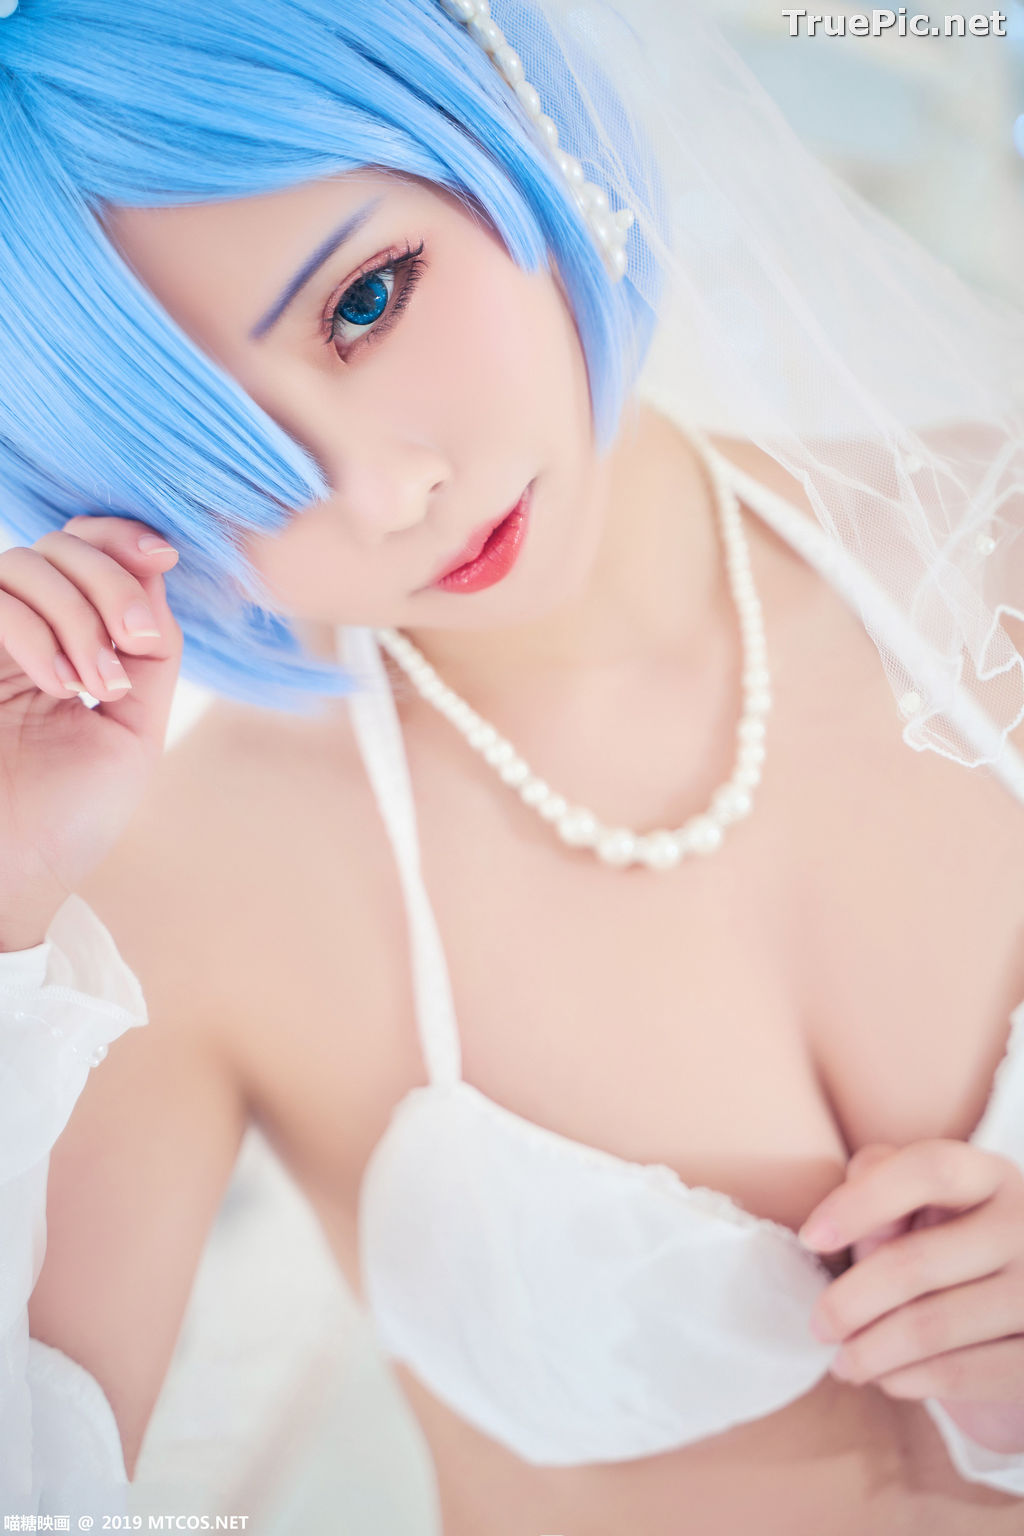 Image [MTCos] 喵糖映画 Vol.043 – Chinese Cute Model – Sexy Rem Cosplay - TruePic.net - Picture-23